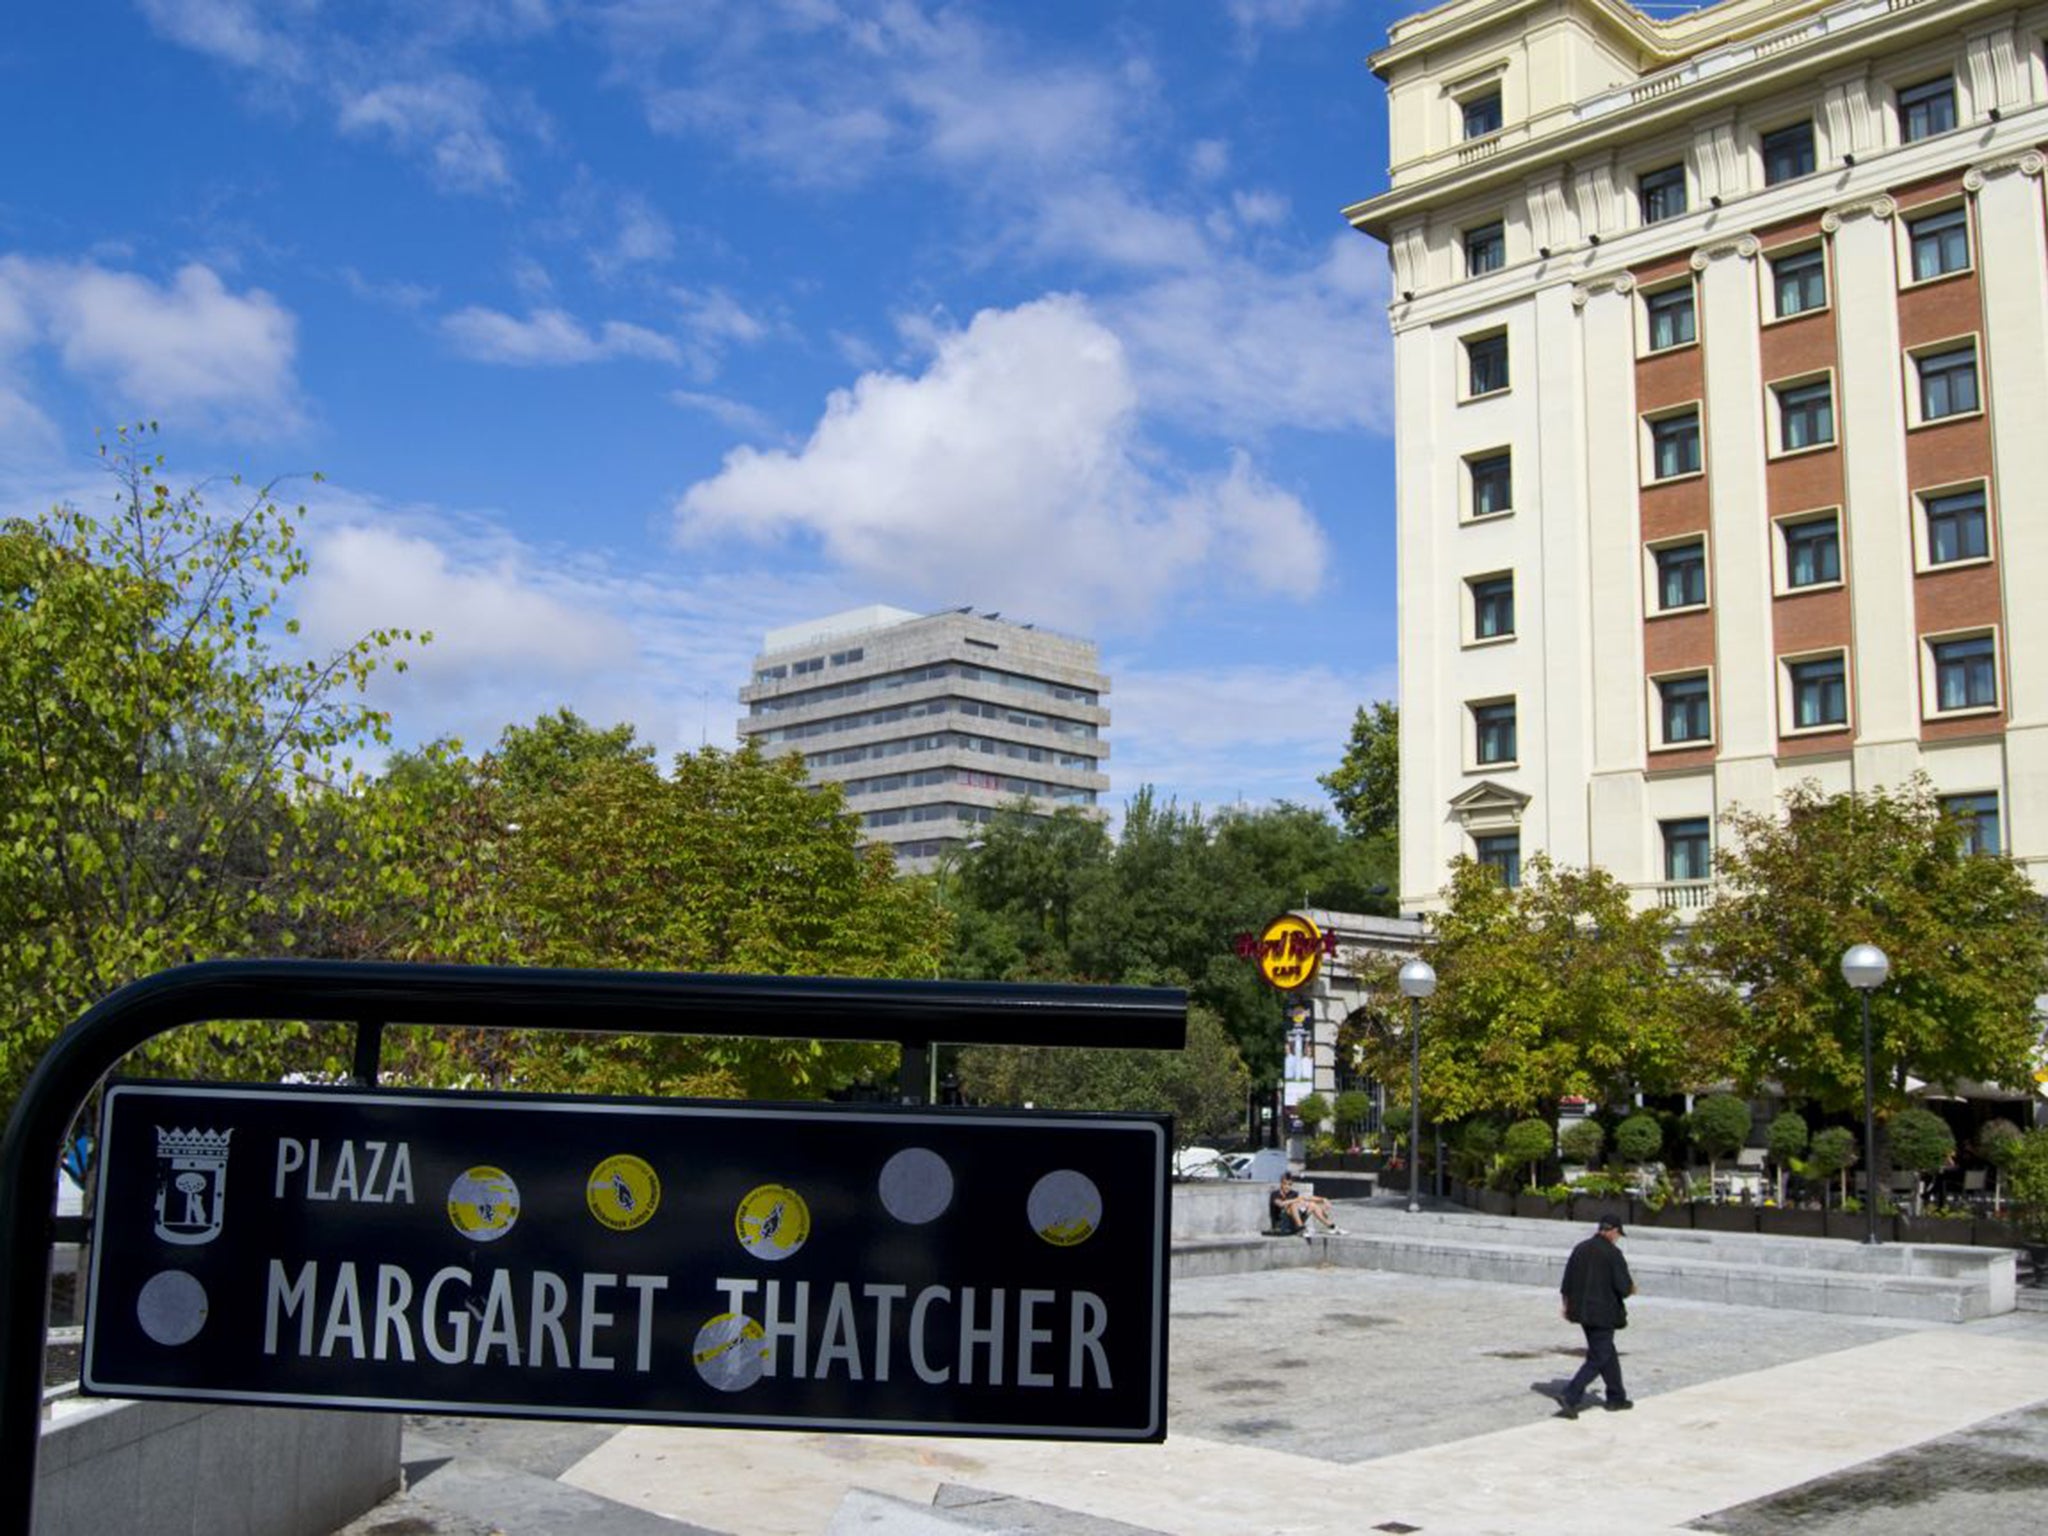 Plaza Margaret Thatcher in Madrid, inaugurated last year